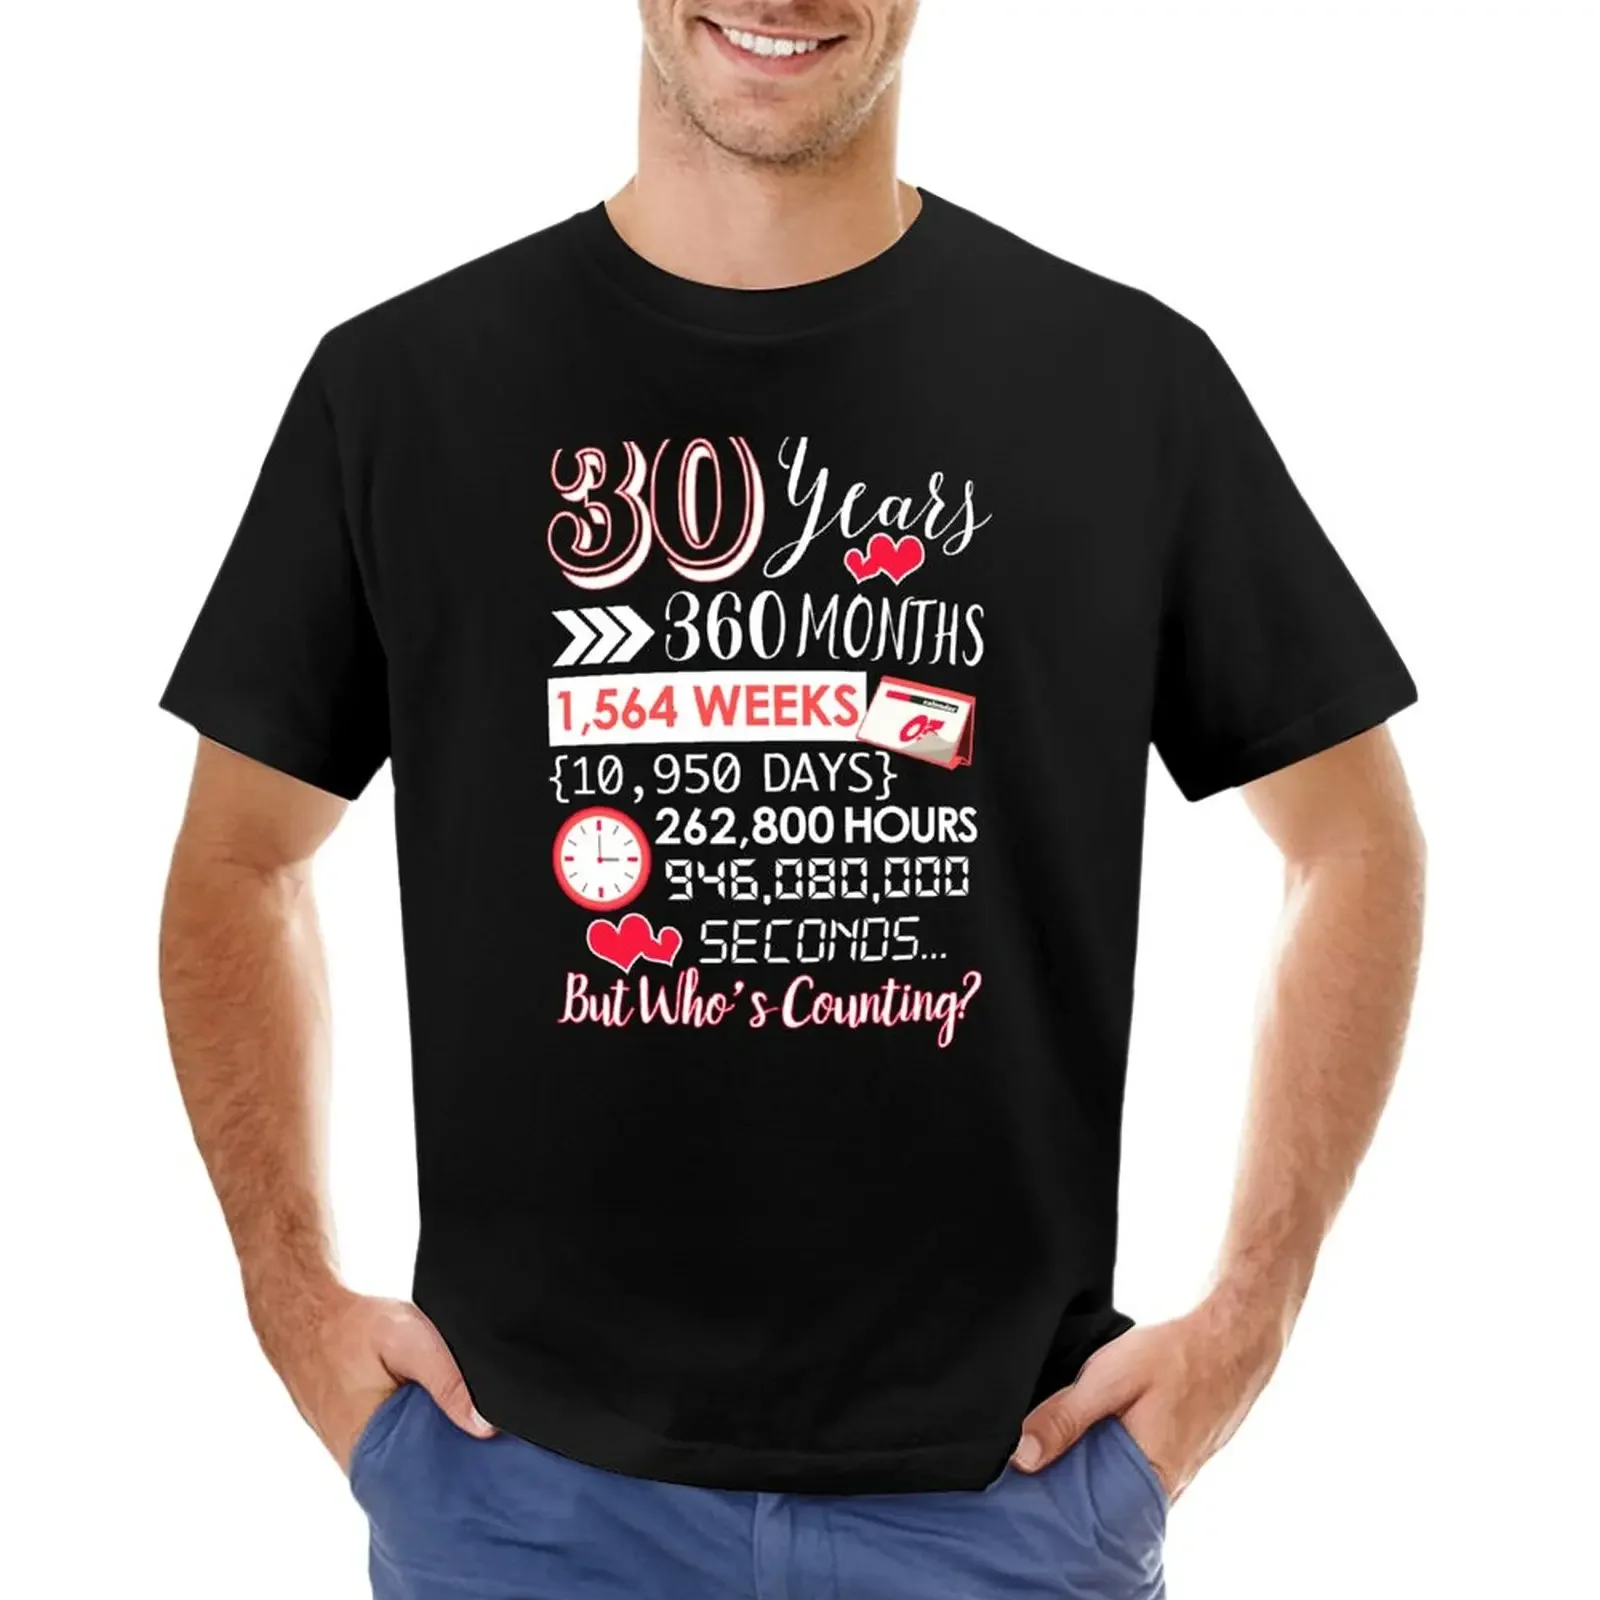 

30 Years of Marriage - Happily Married Couple - 30th Wedding Anniversary Gift T-Shirt summer top oversized t shirt men